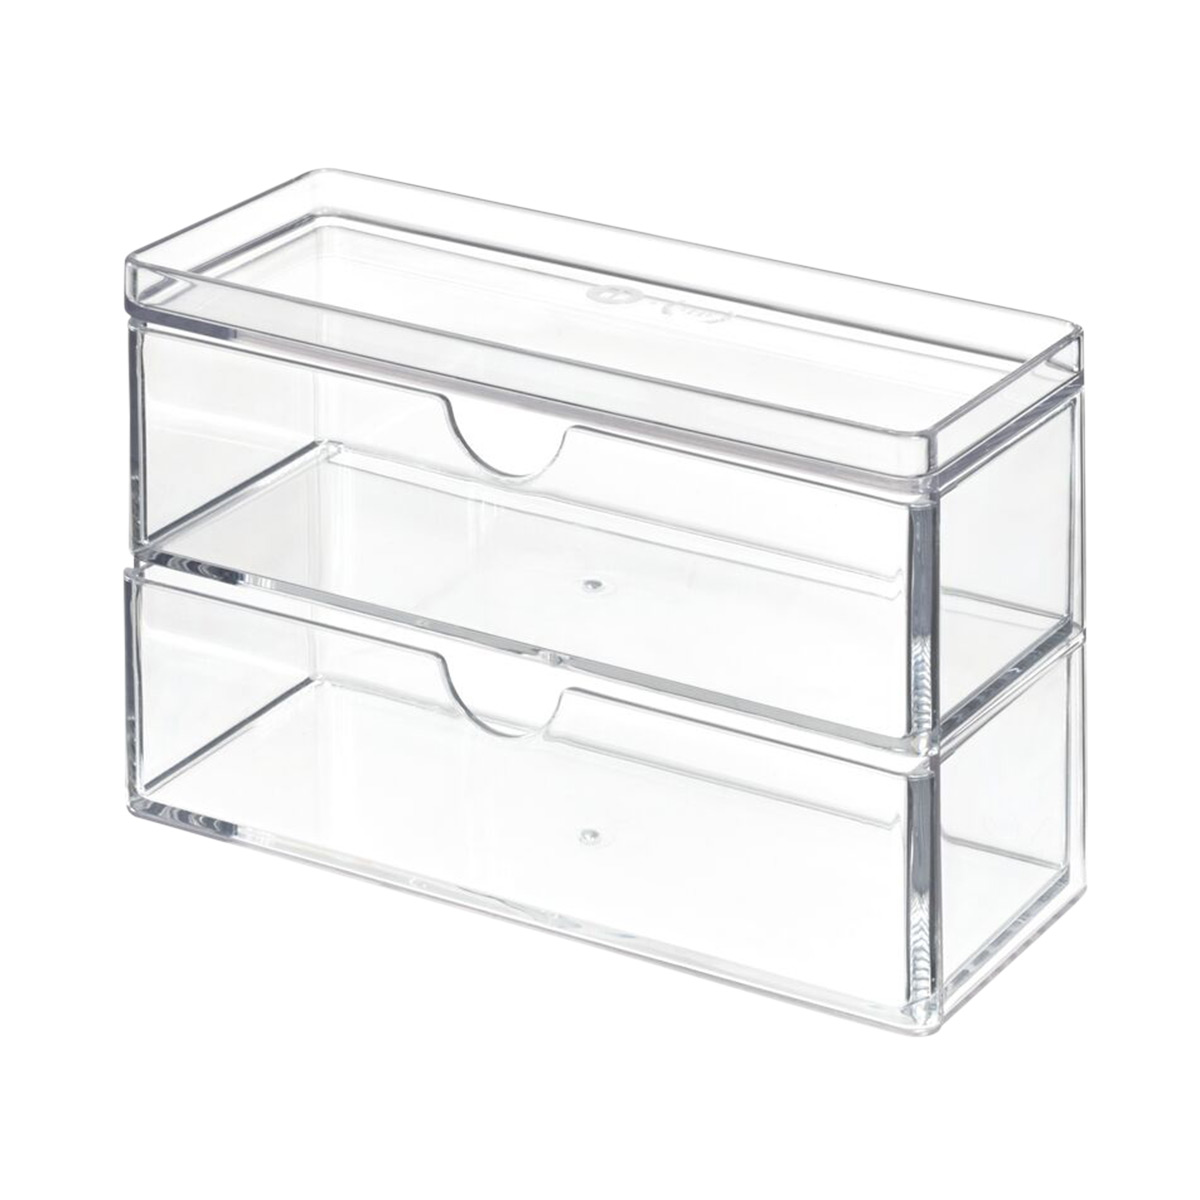 https://www.containerstore.com/catalogimages/393058/10082313-THE-Mini-2-Drawer-Organizer.jpg